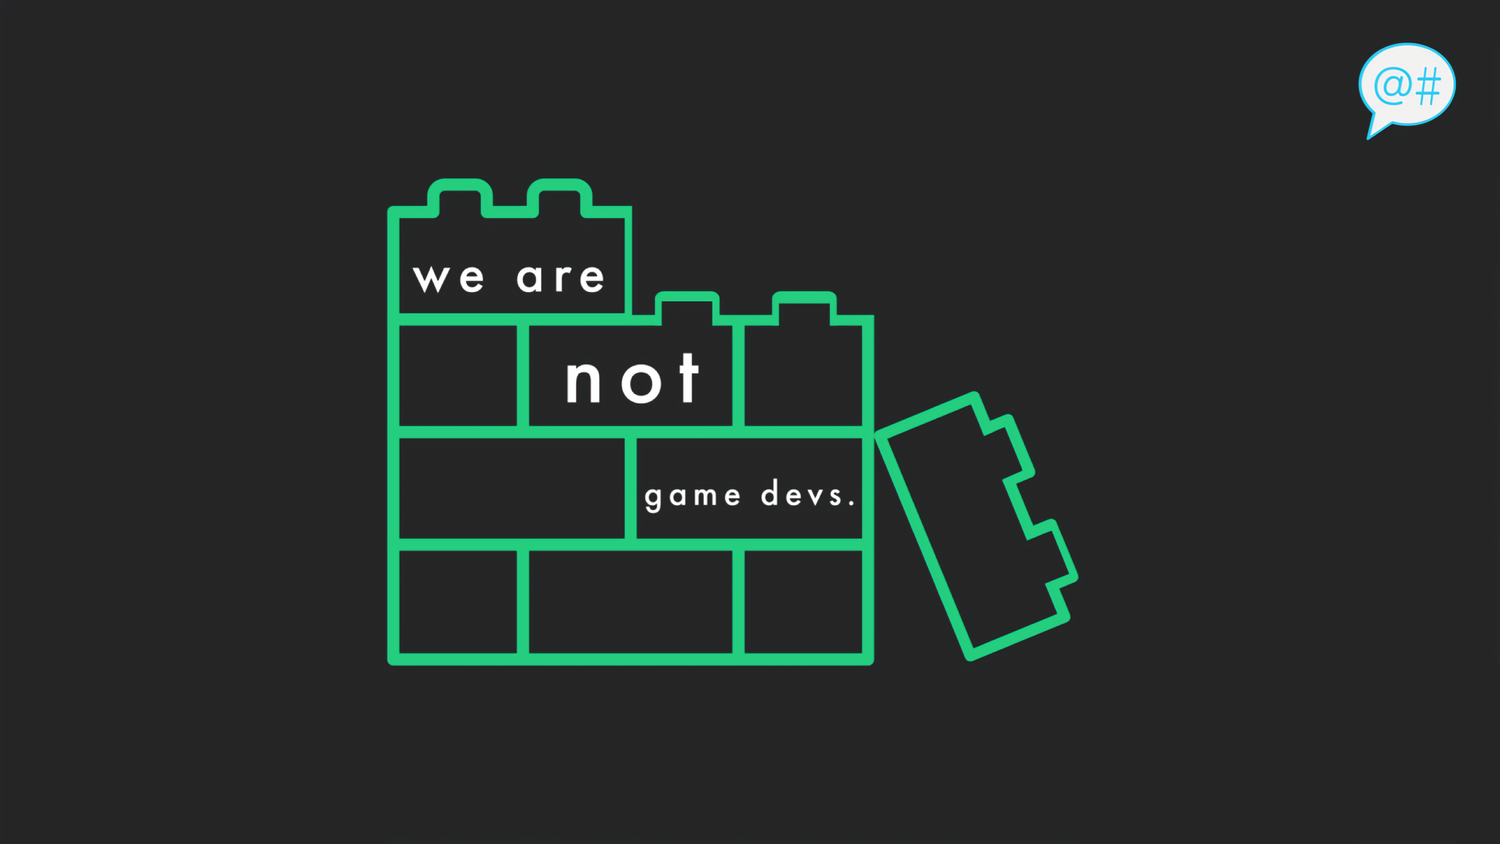 We Are Not Game Devs